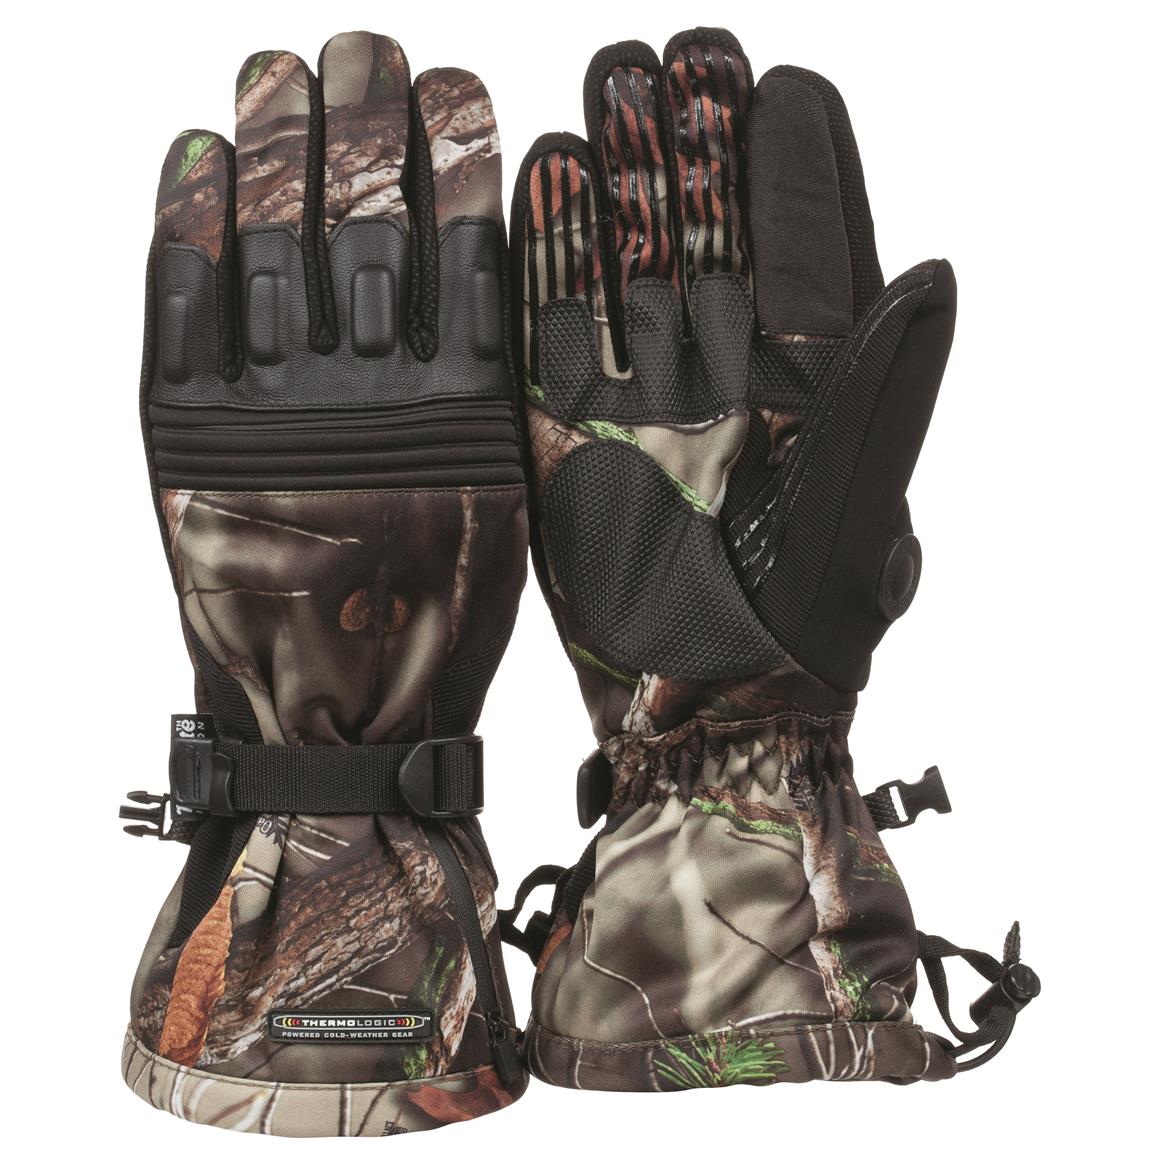 Thermologic Heated Gloves - 148956, Gloves & Mittens at Sportsman's Guide